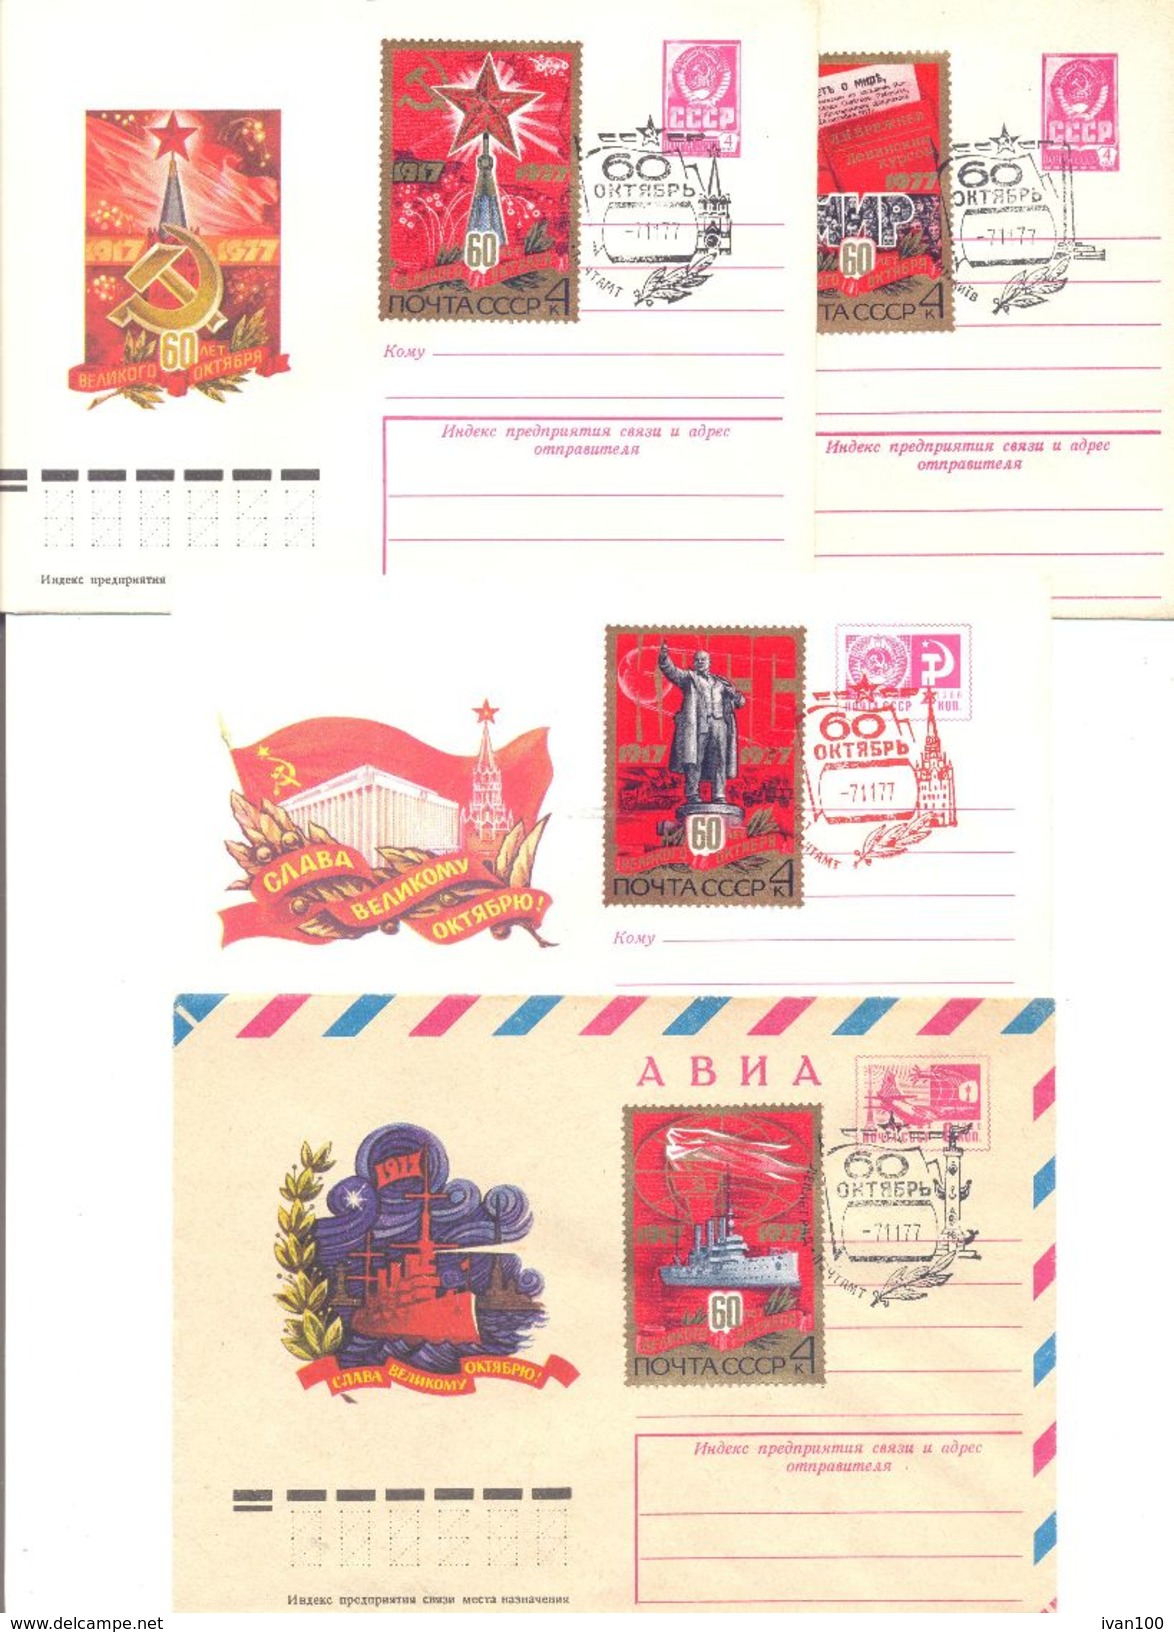 1977. USSR/Russia, 60y Of October Revolution, 4 Postal Covers With Special Postmark - Covers & Documents